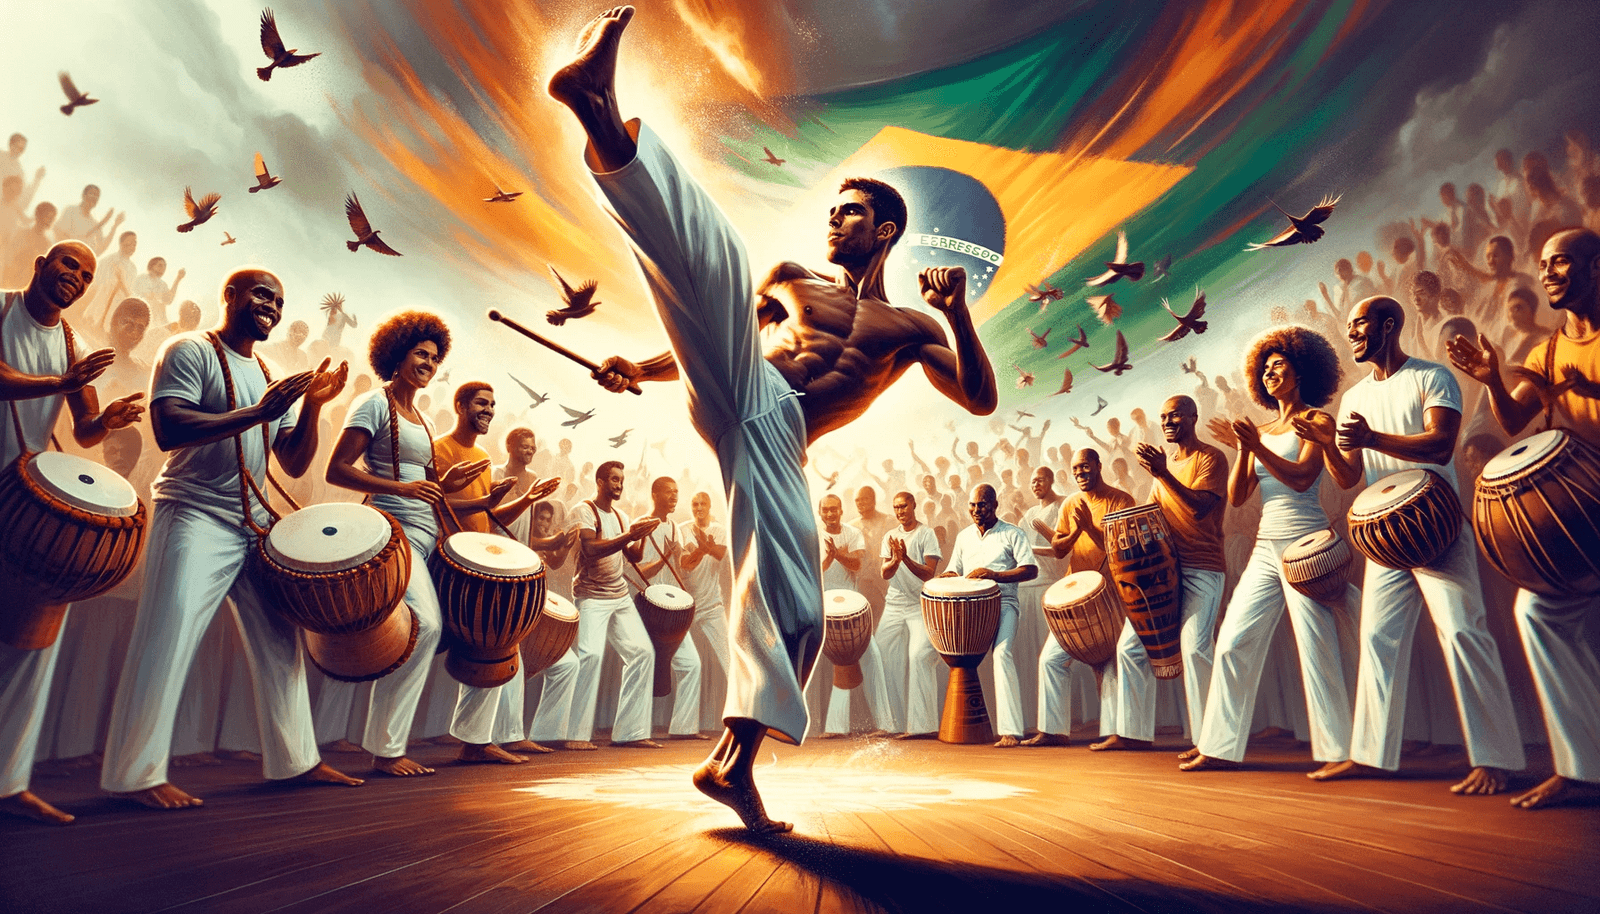 An illustration of a Brazilian Capoeira roda with participants playing instruments and a central figure executing a high kick, vibrant colors and a Brazilian flag in the background capturing the dynamic energy of the art form.